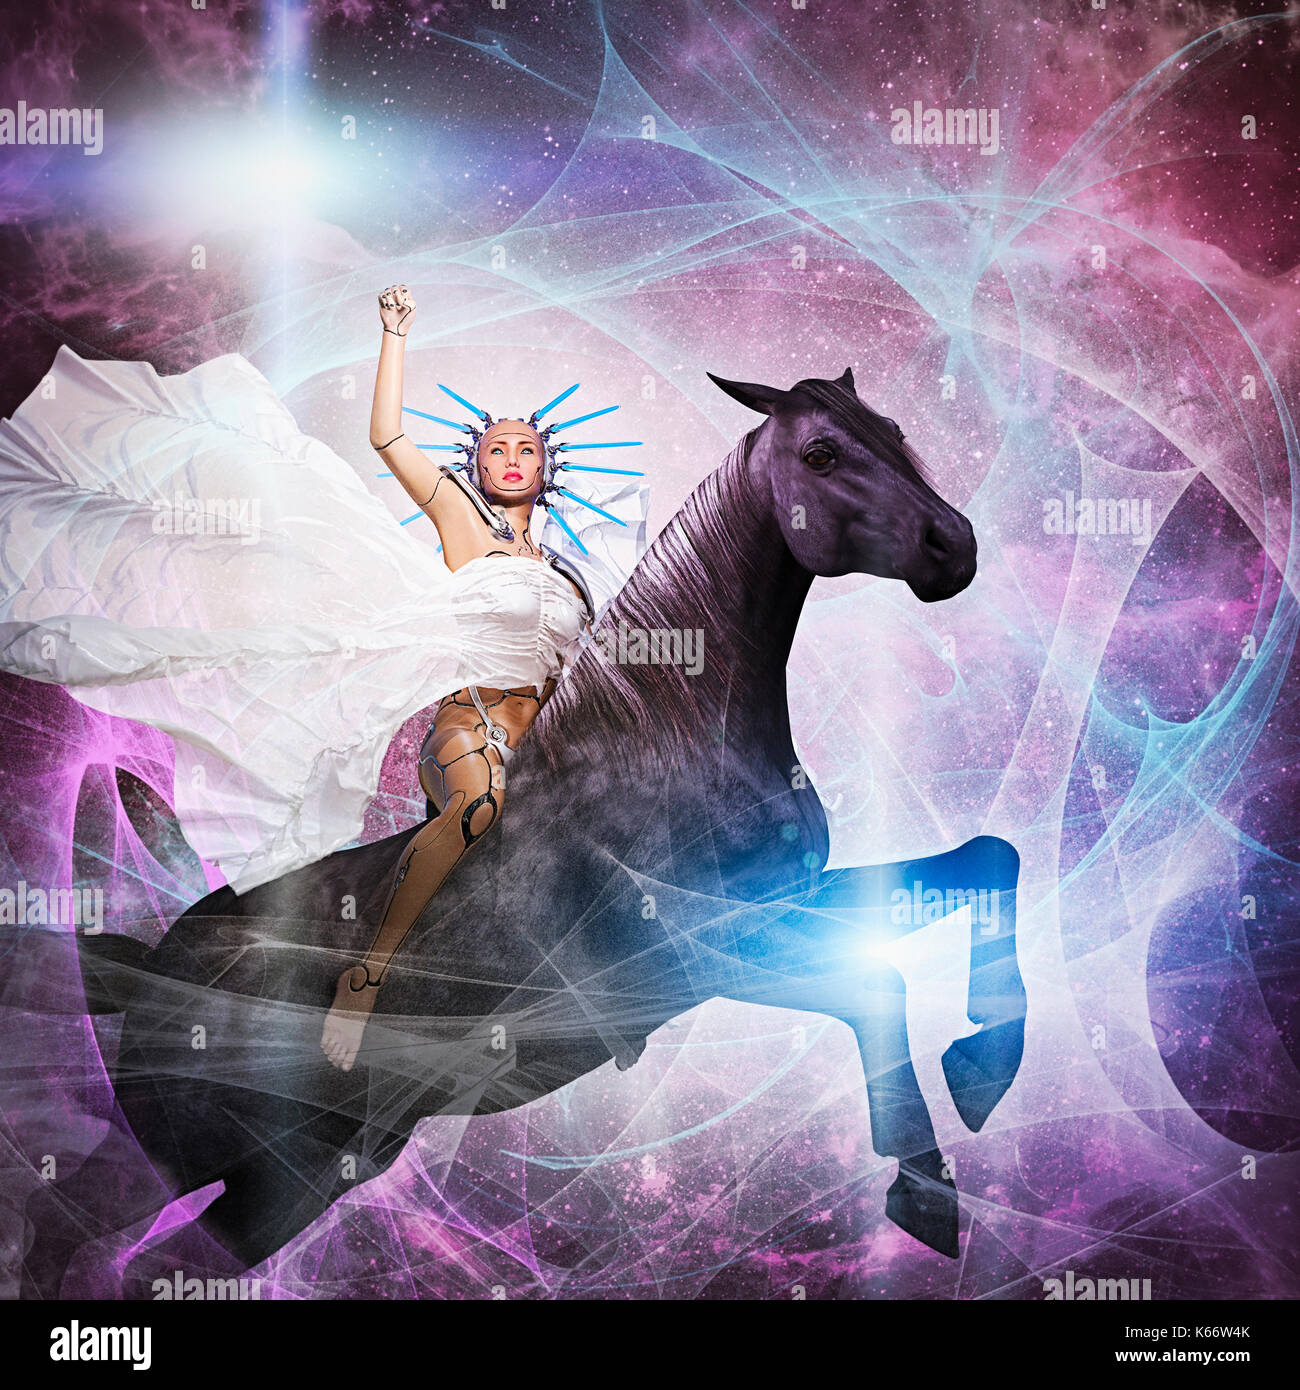 Cyborg woman riding horse in cyberspace Stock Photo